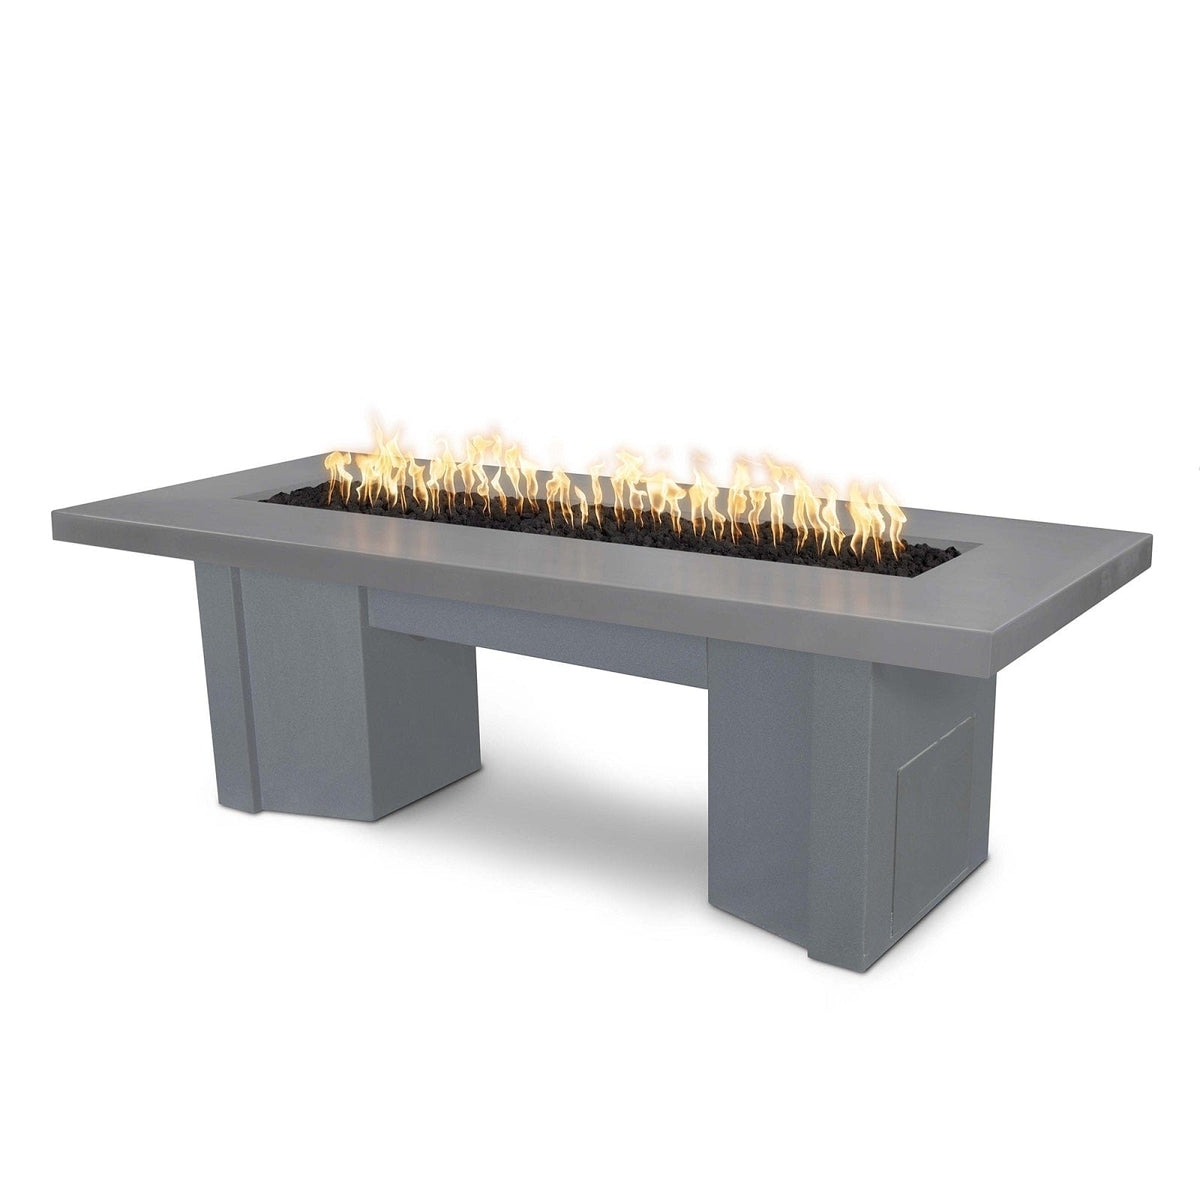 The Outdoor Plus Fire Features Natural Gray (-NGY) / Gray Powder Coated Steel (-GRY) The Outdoor Plus 60&quot; Alameda Fire Table Smooth Concrete in Natural Gas - Flame Sense System with Push Button Spark Igniter / OPT-ALMGFRC60FSEN-NG